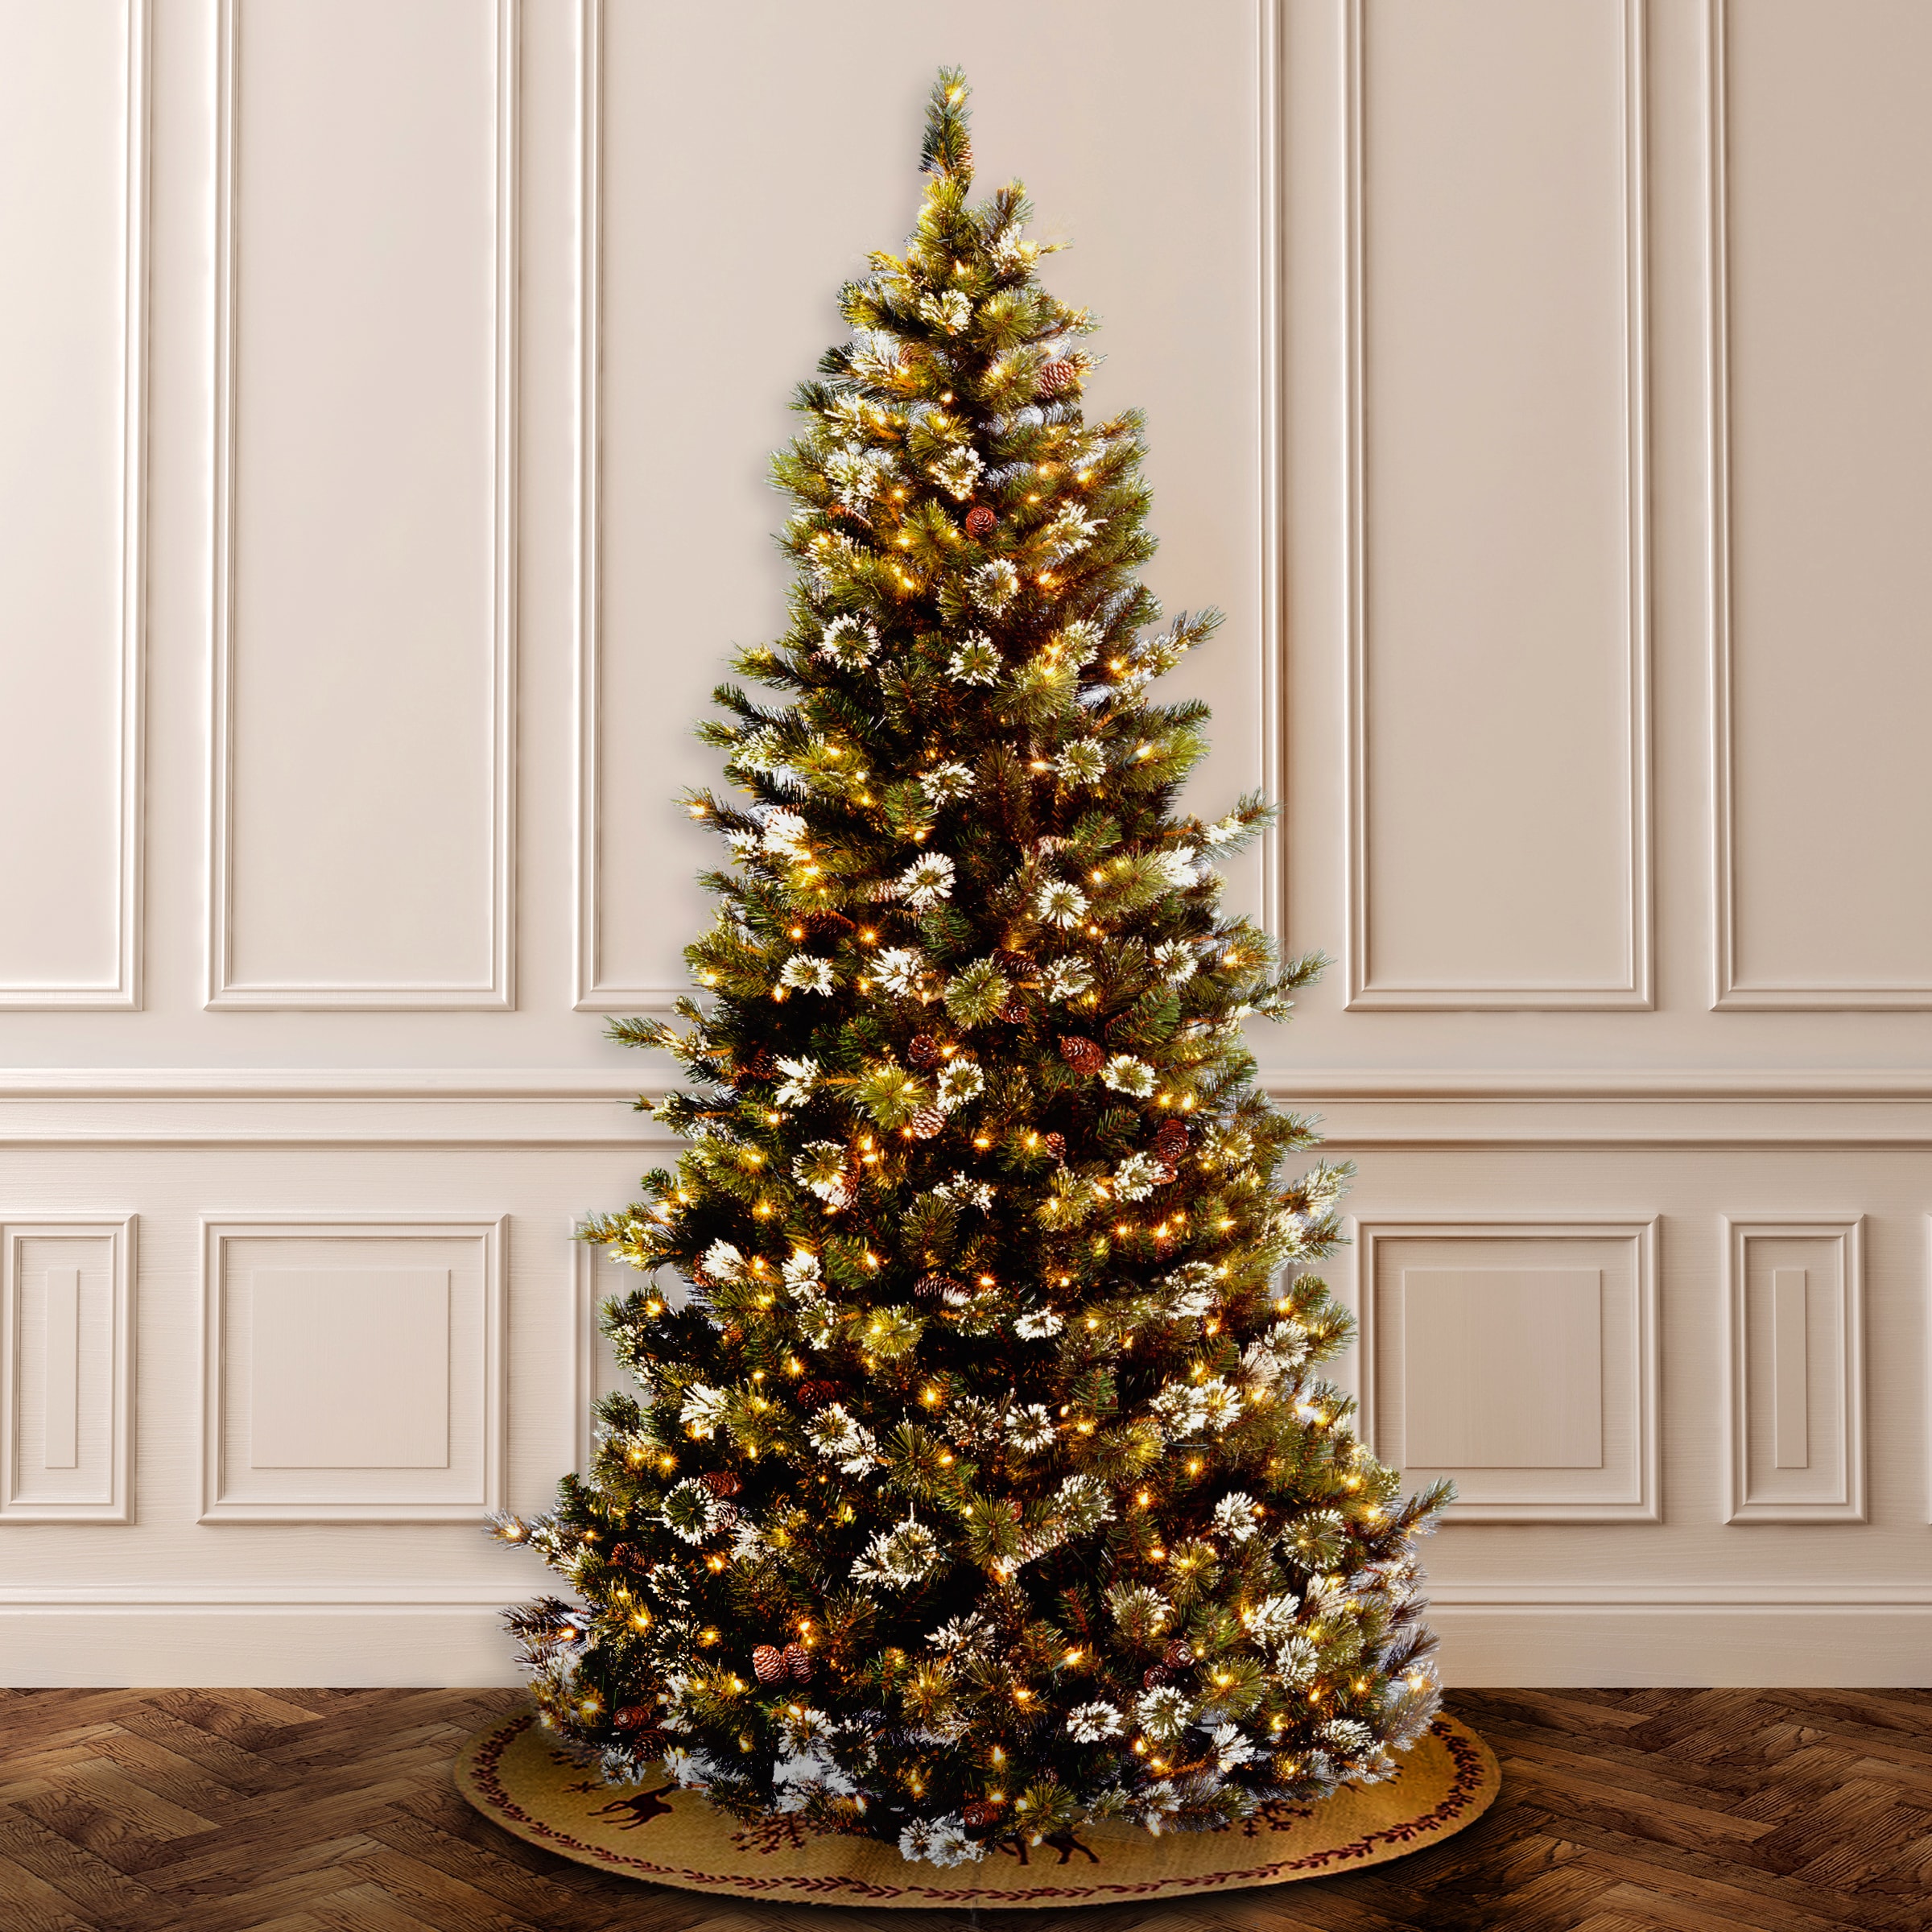 National Tree Company 7.5-ft Pre-lit Artificial Christmas Tree with ...